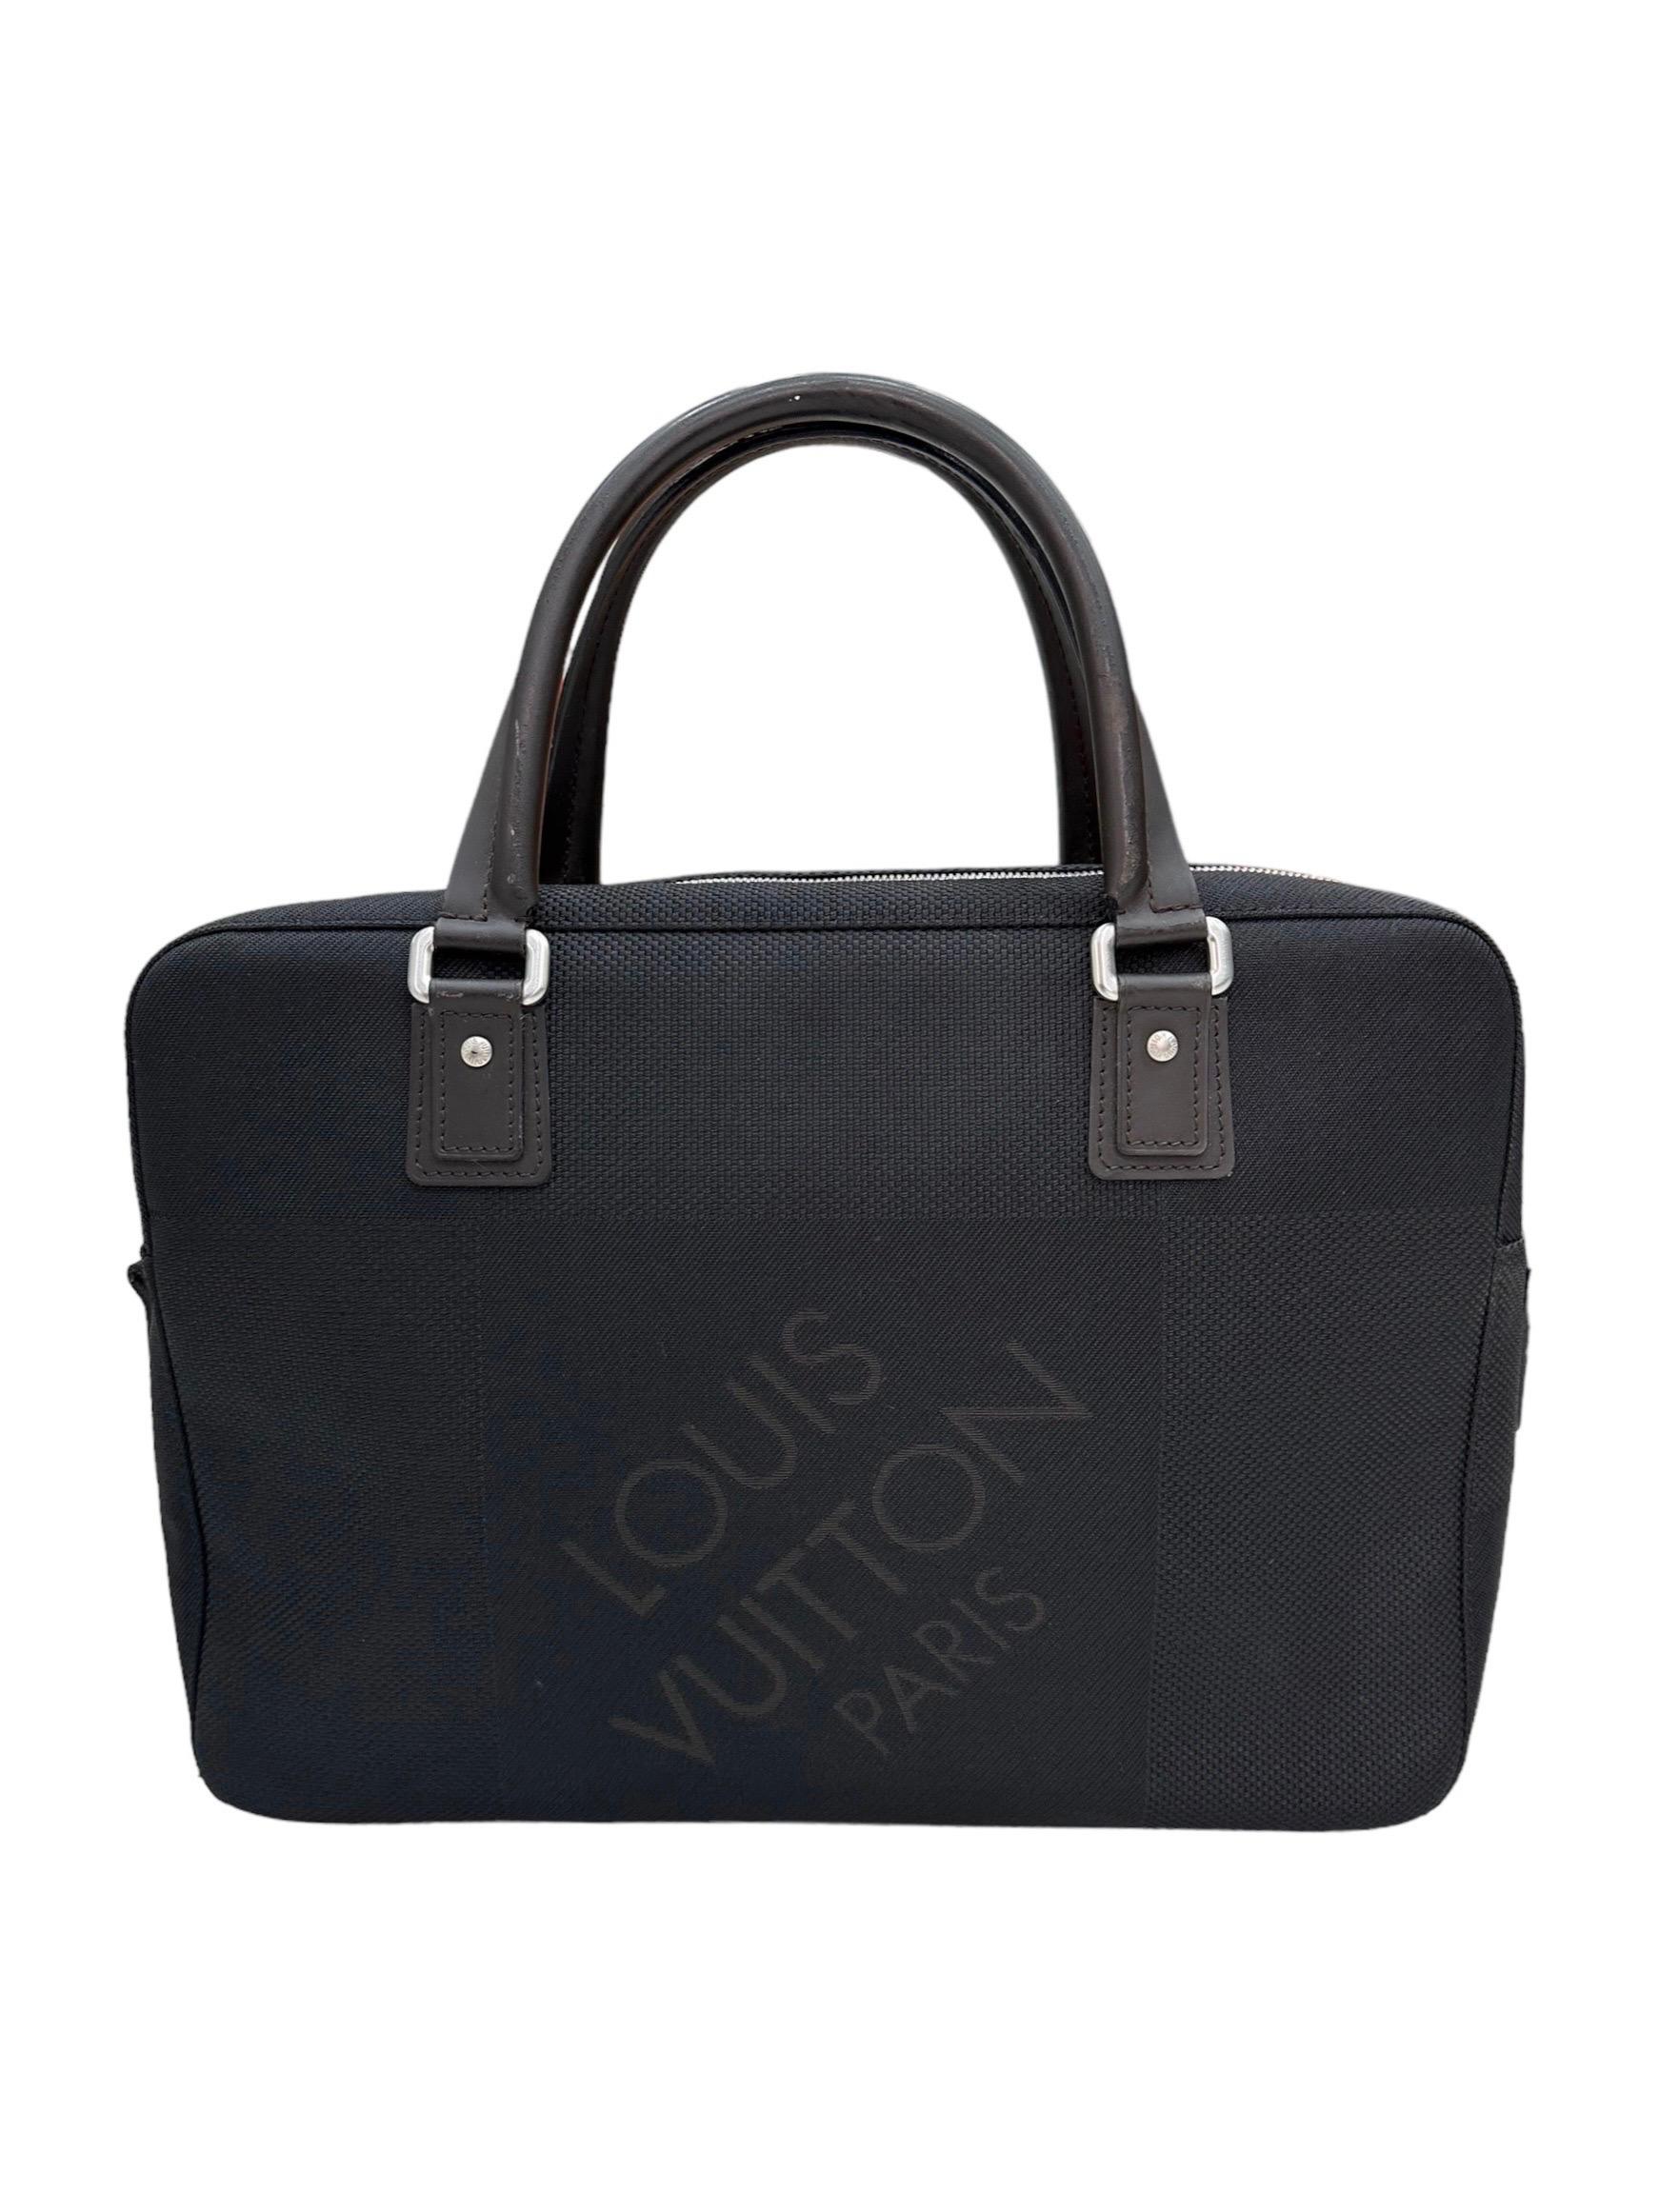 Louis Vuitton signed bag, Yack model, size GM, made in black canvas with brown leather inserts and golden hardware. Featuring a top zip closure. Equipped with two rigid handles made of smooth brown leather and a comfortable front pocket with zip